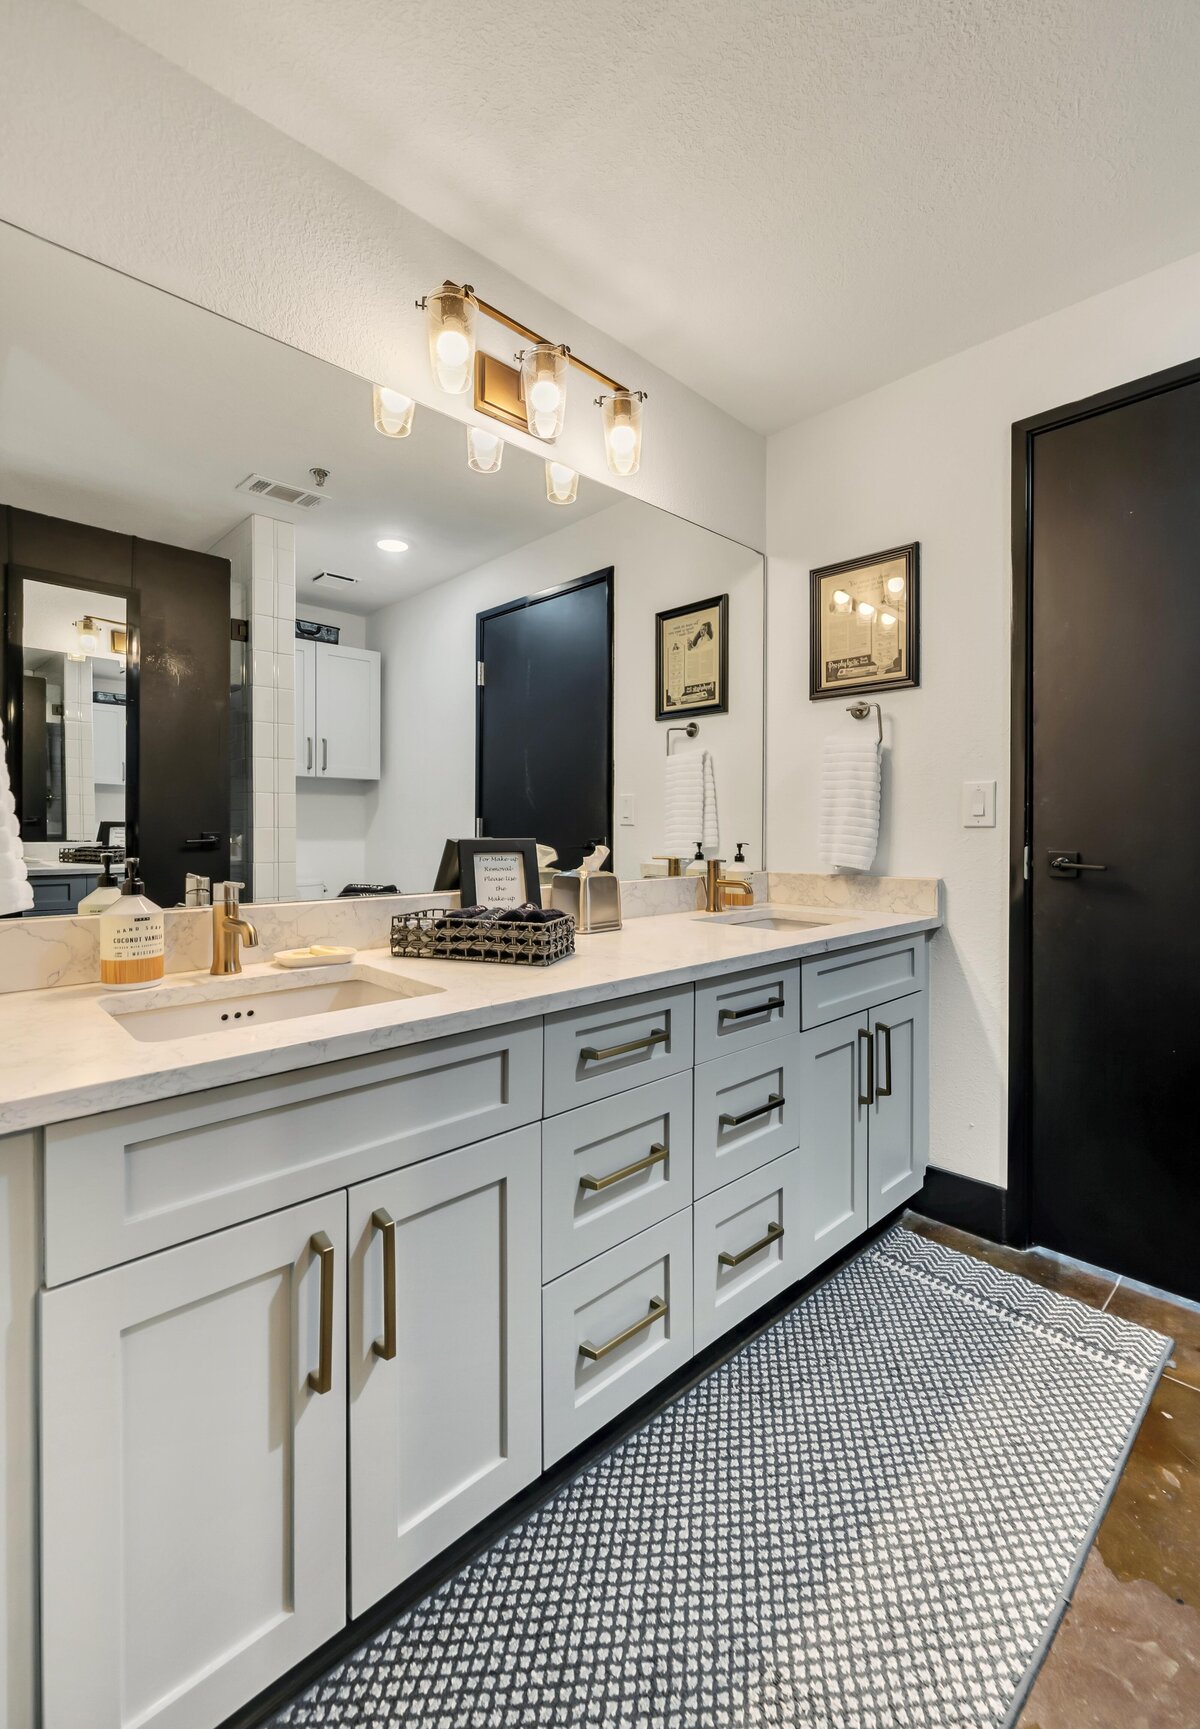 Bathroom with double vanity in this three-bedroom, two-bathroom industrial vacation rental loft with free WiFi, skyline view, and fully stocked kitchen in downtown Waco, Tx